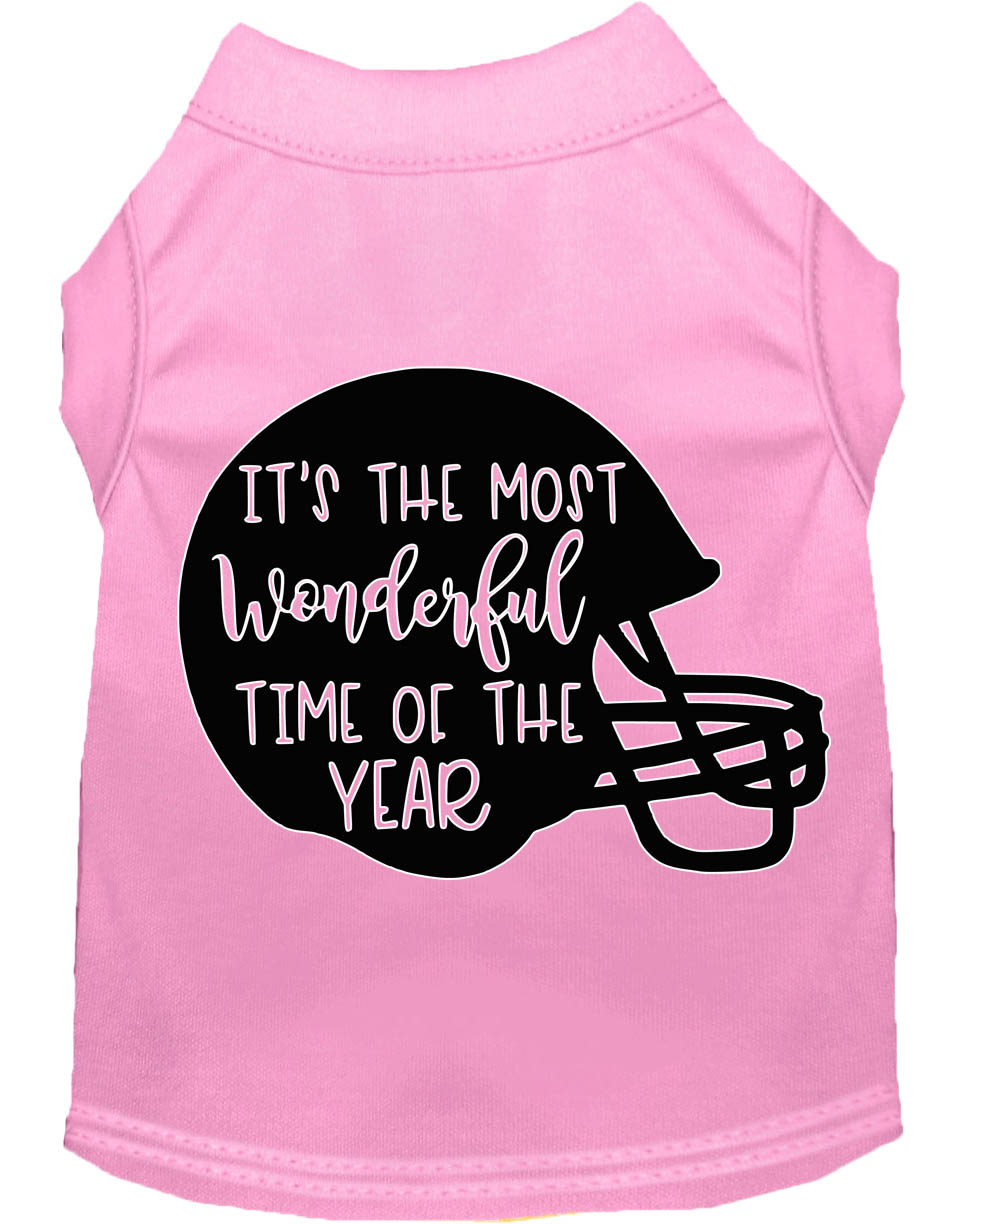 Most Wonderful Time of the Year (Football) Screen Print Dog Shirt Light Pink Sm